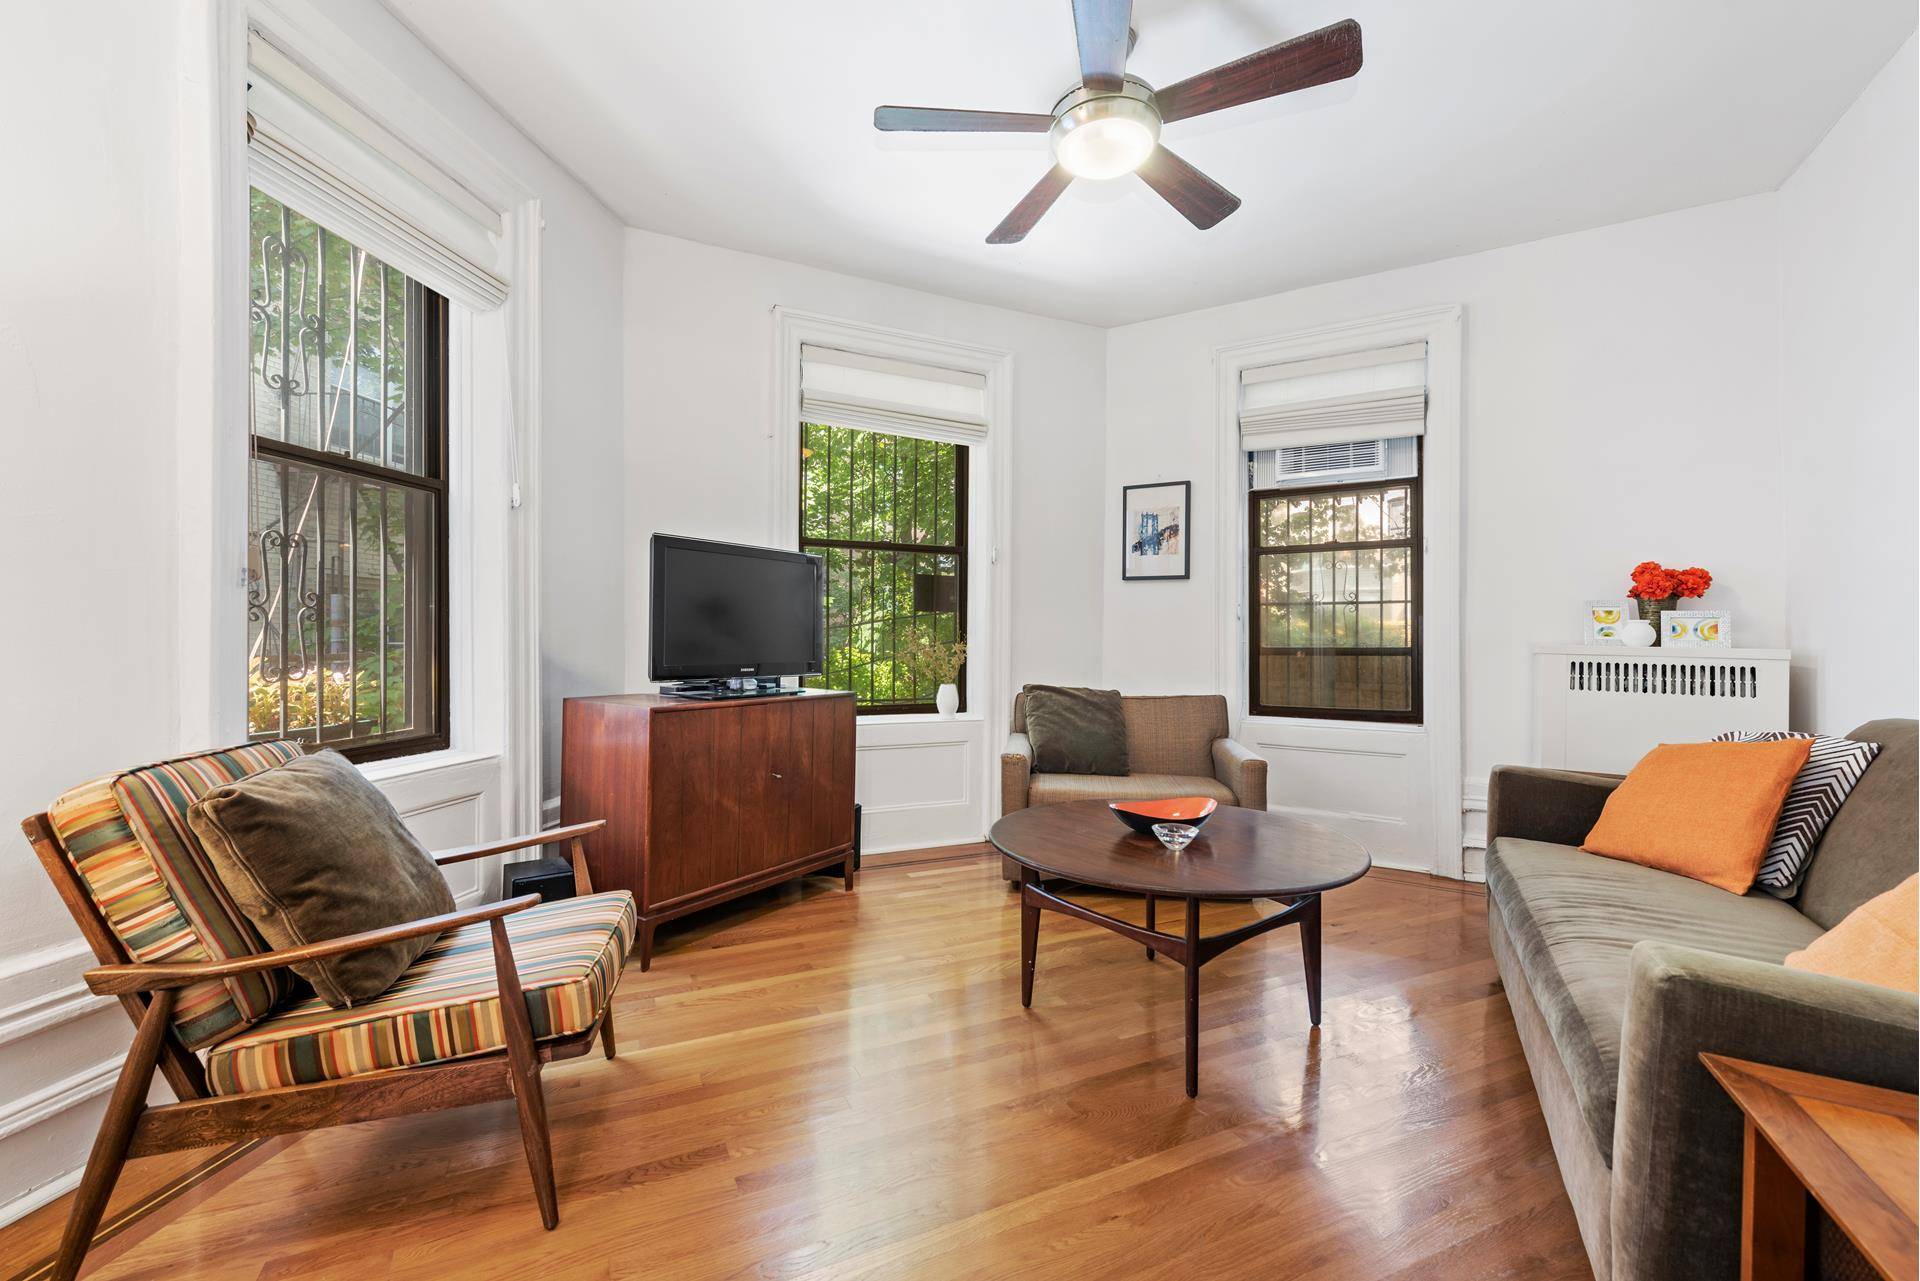 Terrific and rare opportunity to own a spacious, 1350 sq ft convertible 3 or 4 bedroom in prime Prospect Heights !